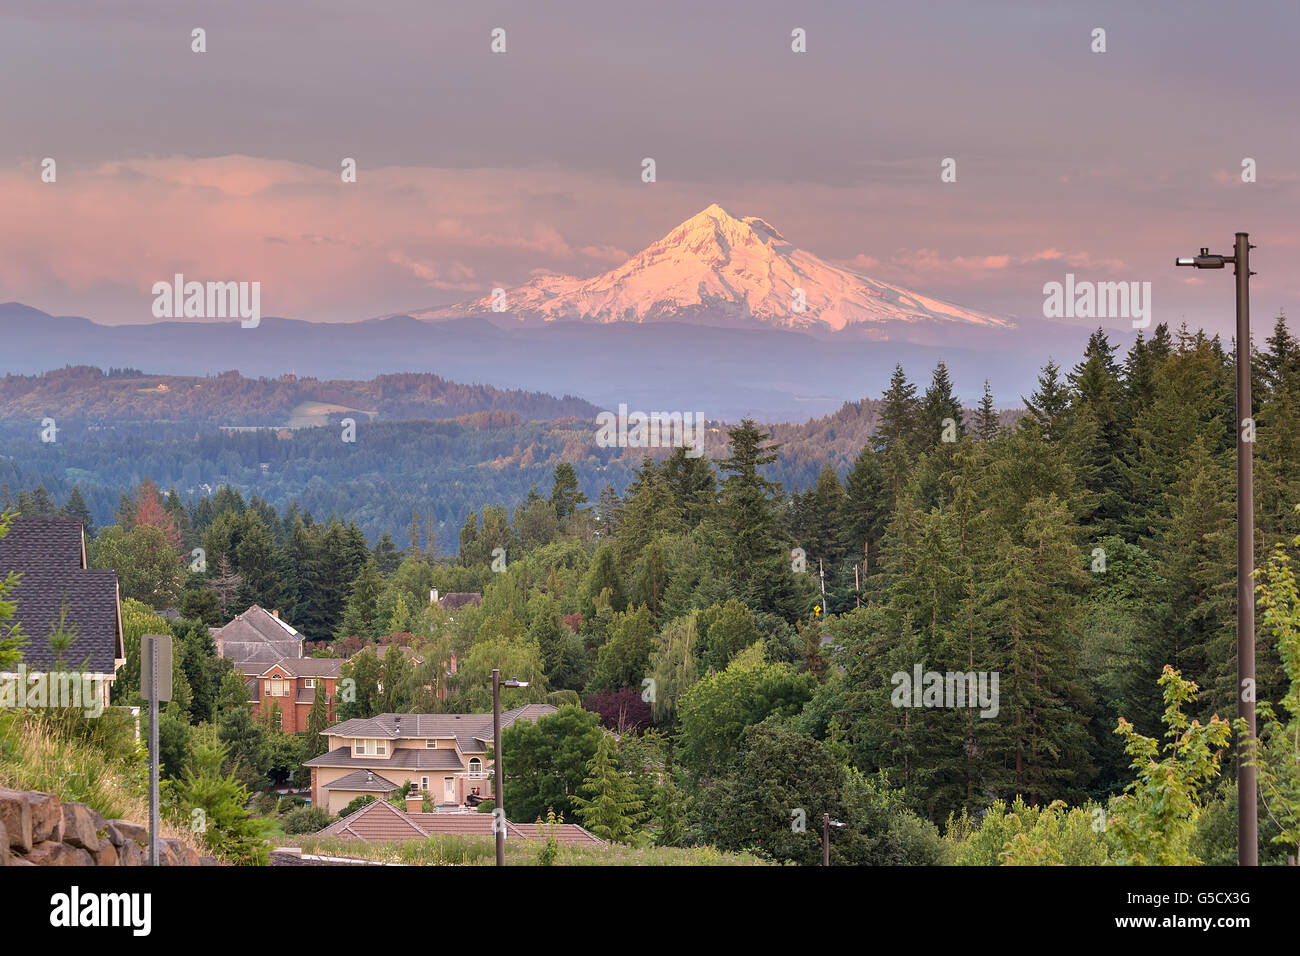 Mount Hood evening alpenglow during sunset from Happy Valley Oregon residential neighborhood in Clackamas County Stock Photo